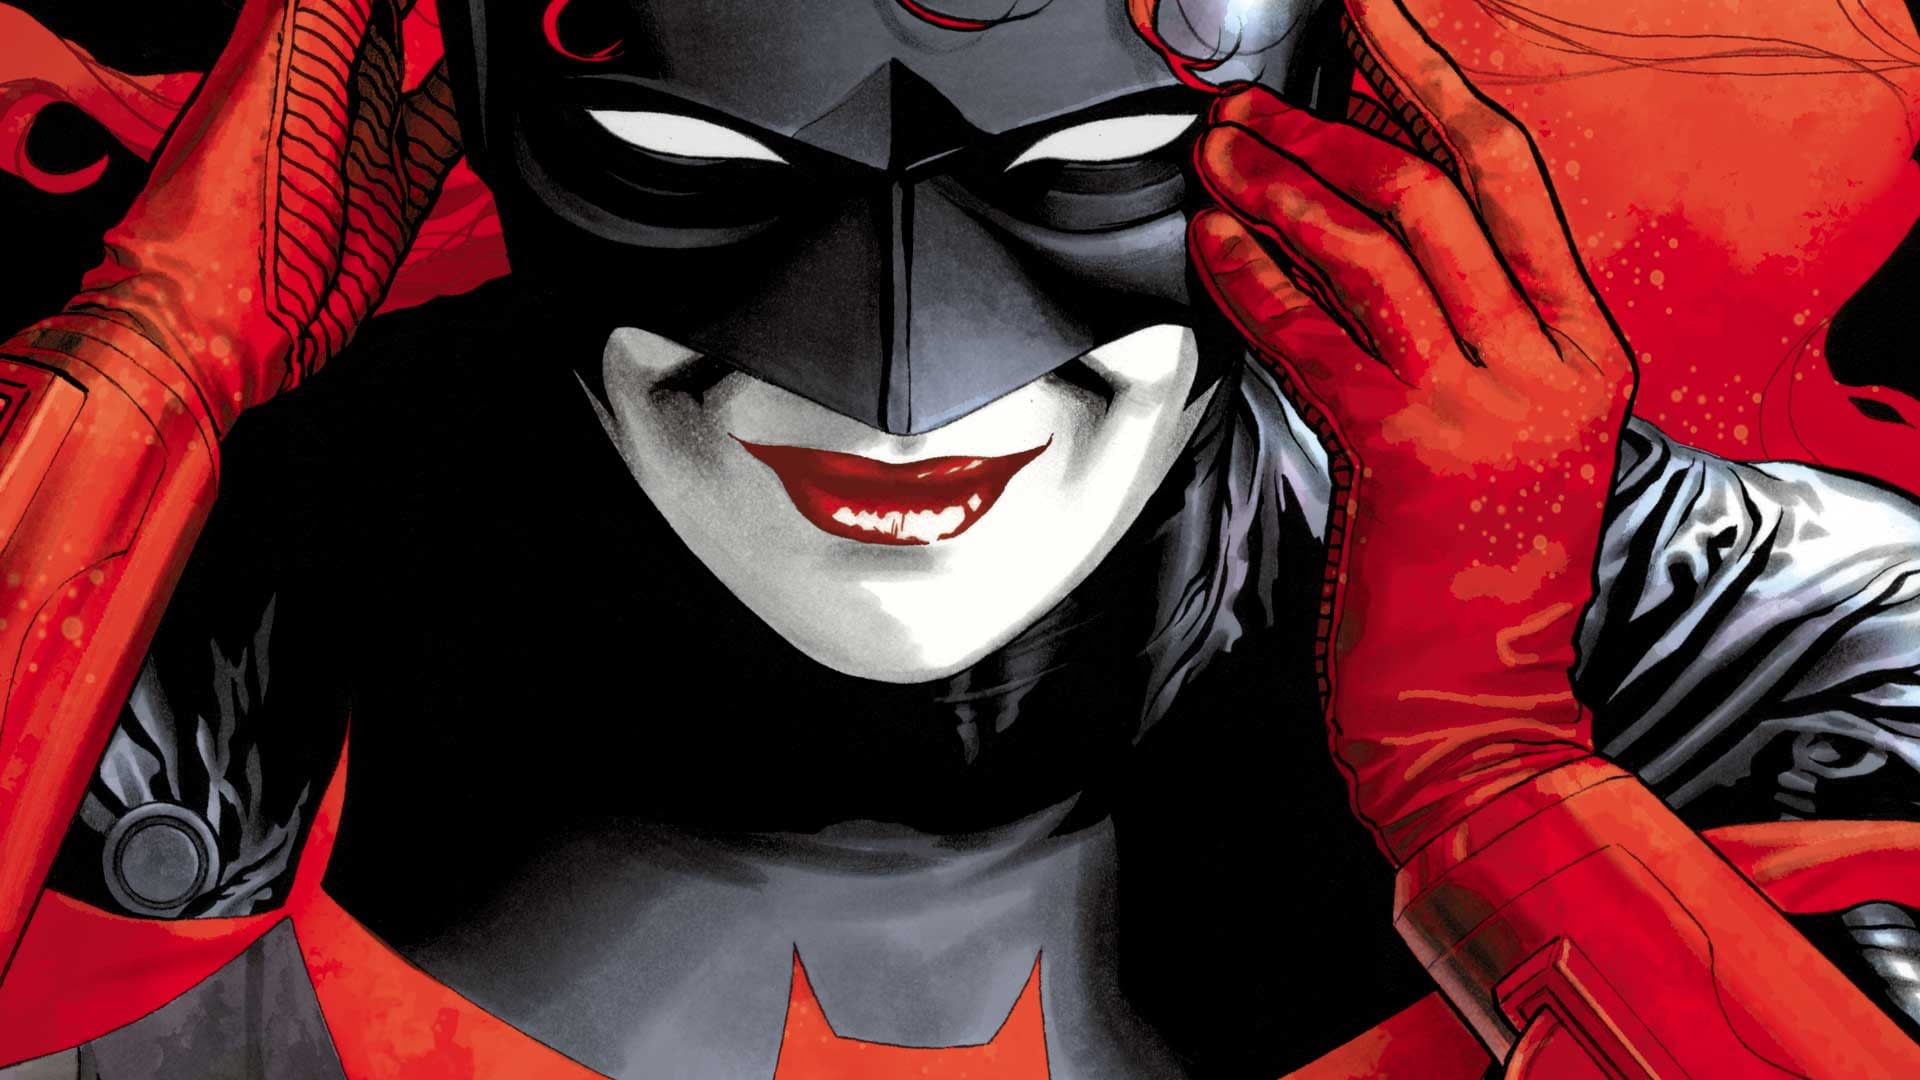 Batwoman Update: Series in "Early Development", No Plans for a Batman Appearance